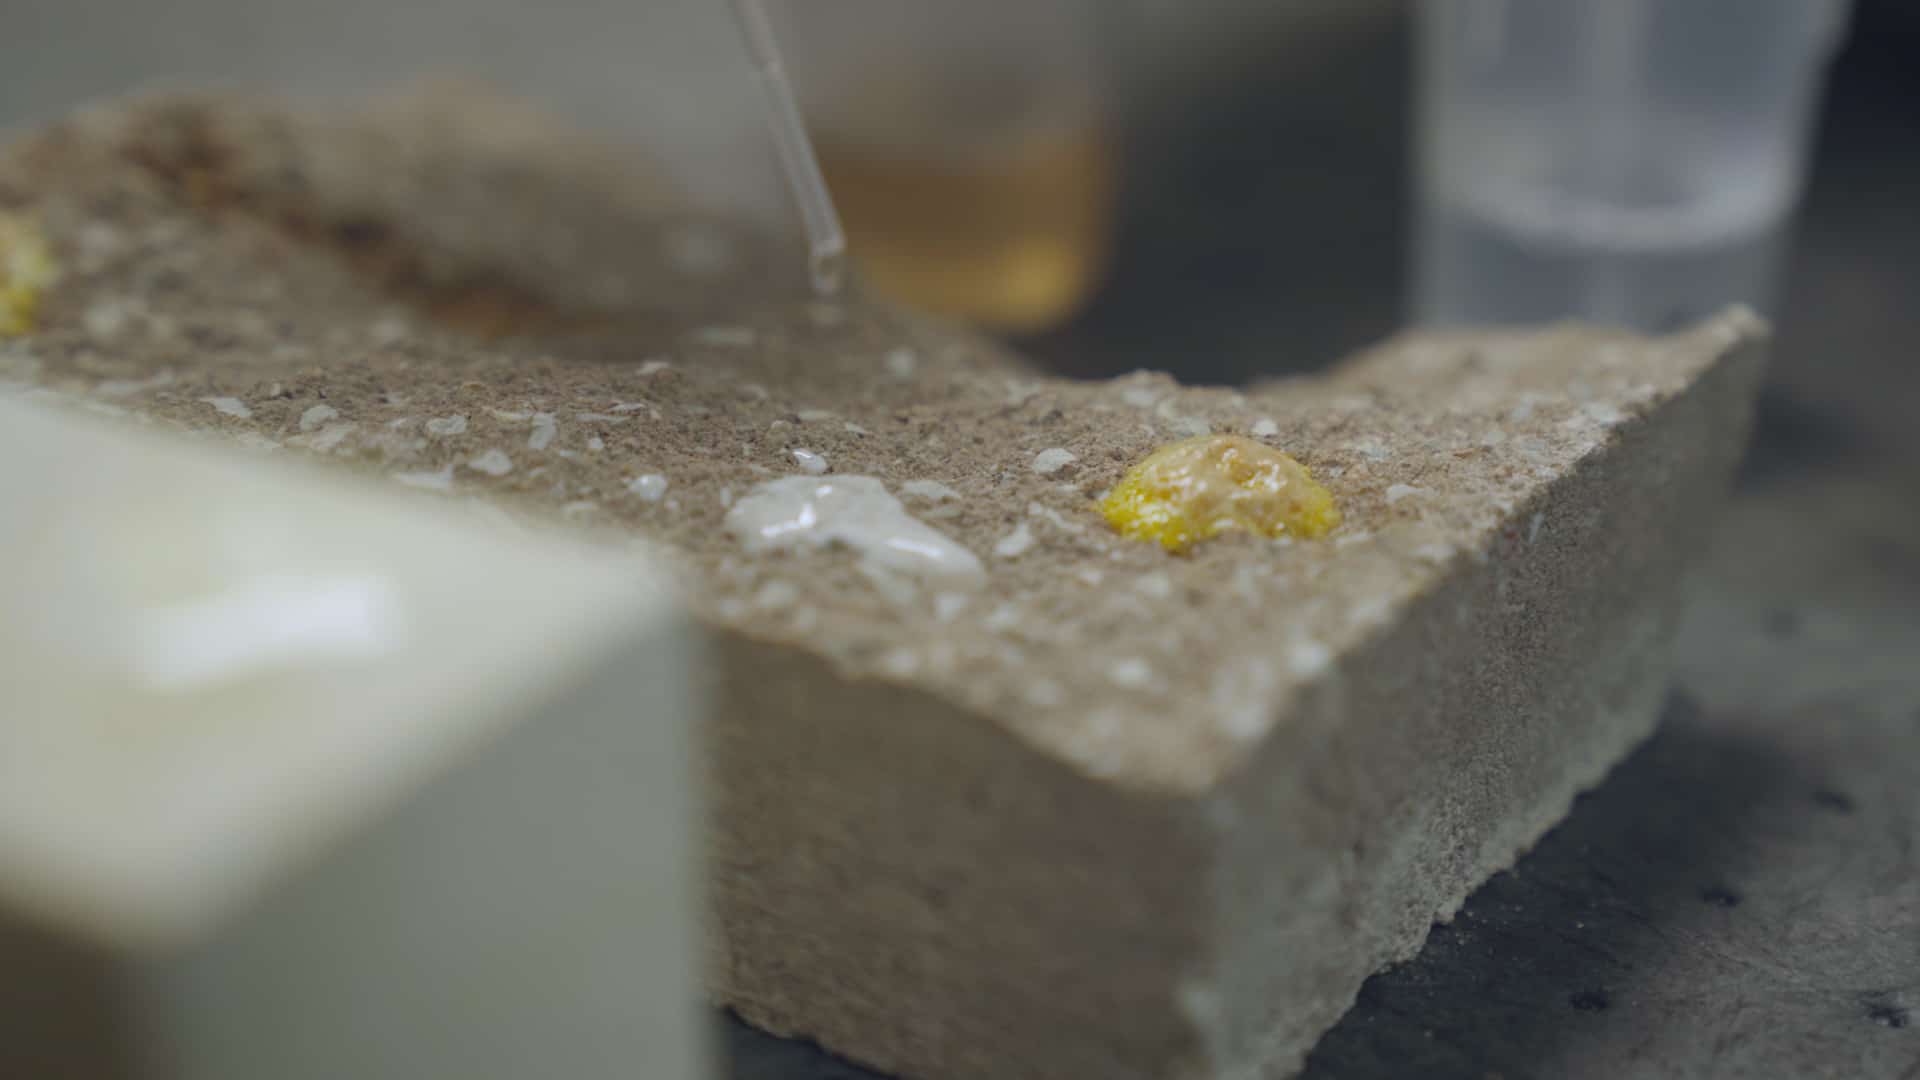 Two acidic masonry cleaners are tested on concrete block.